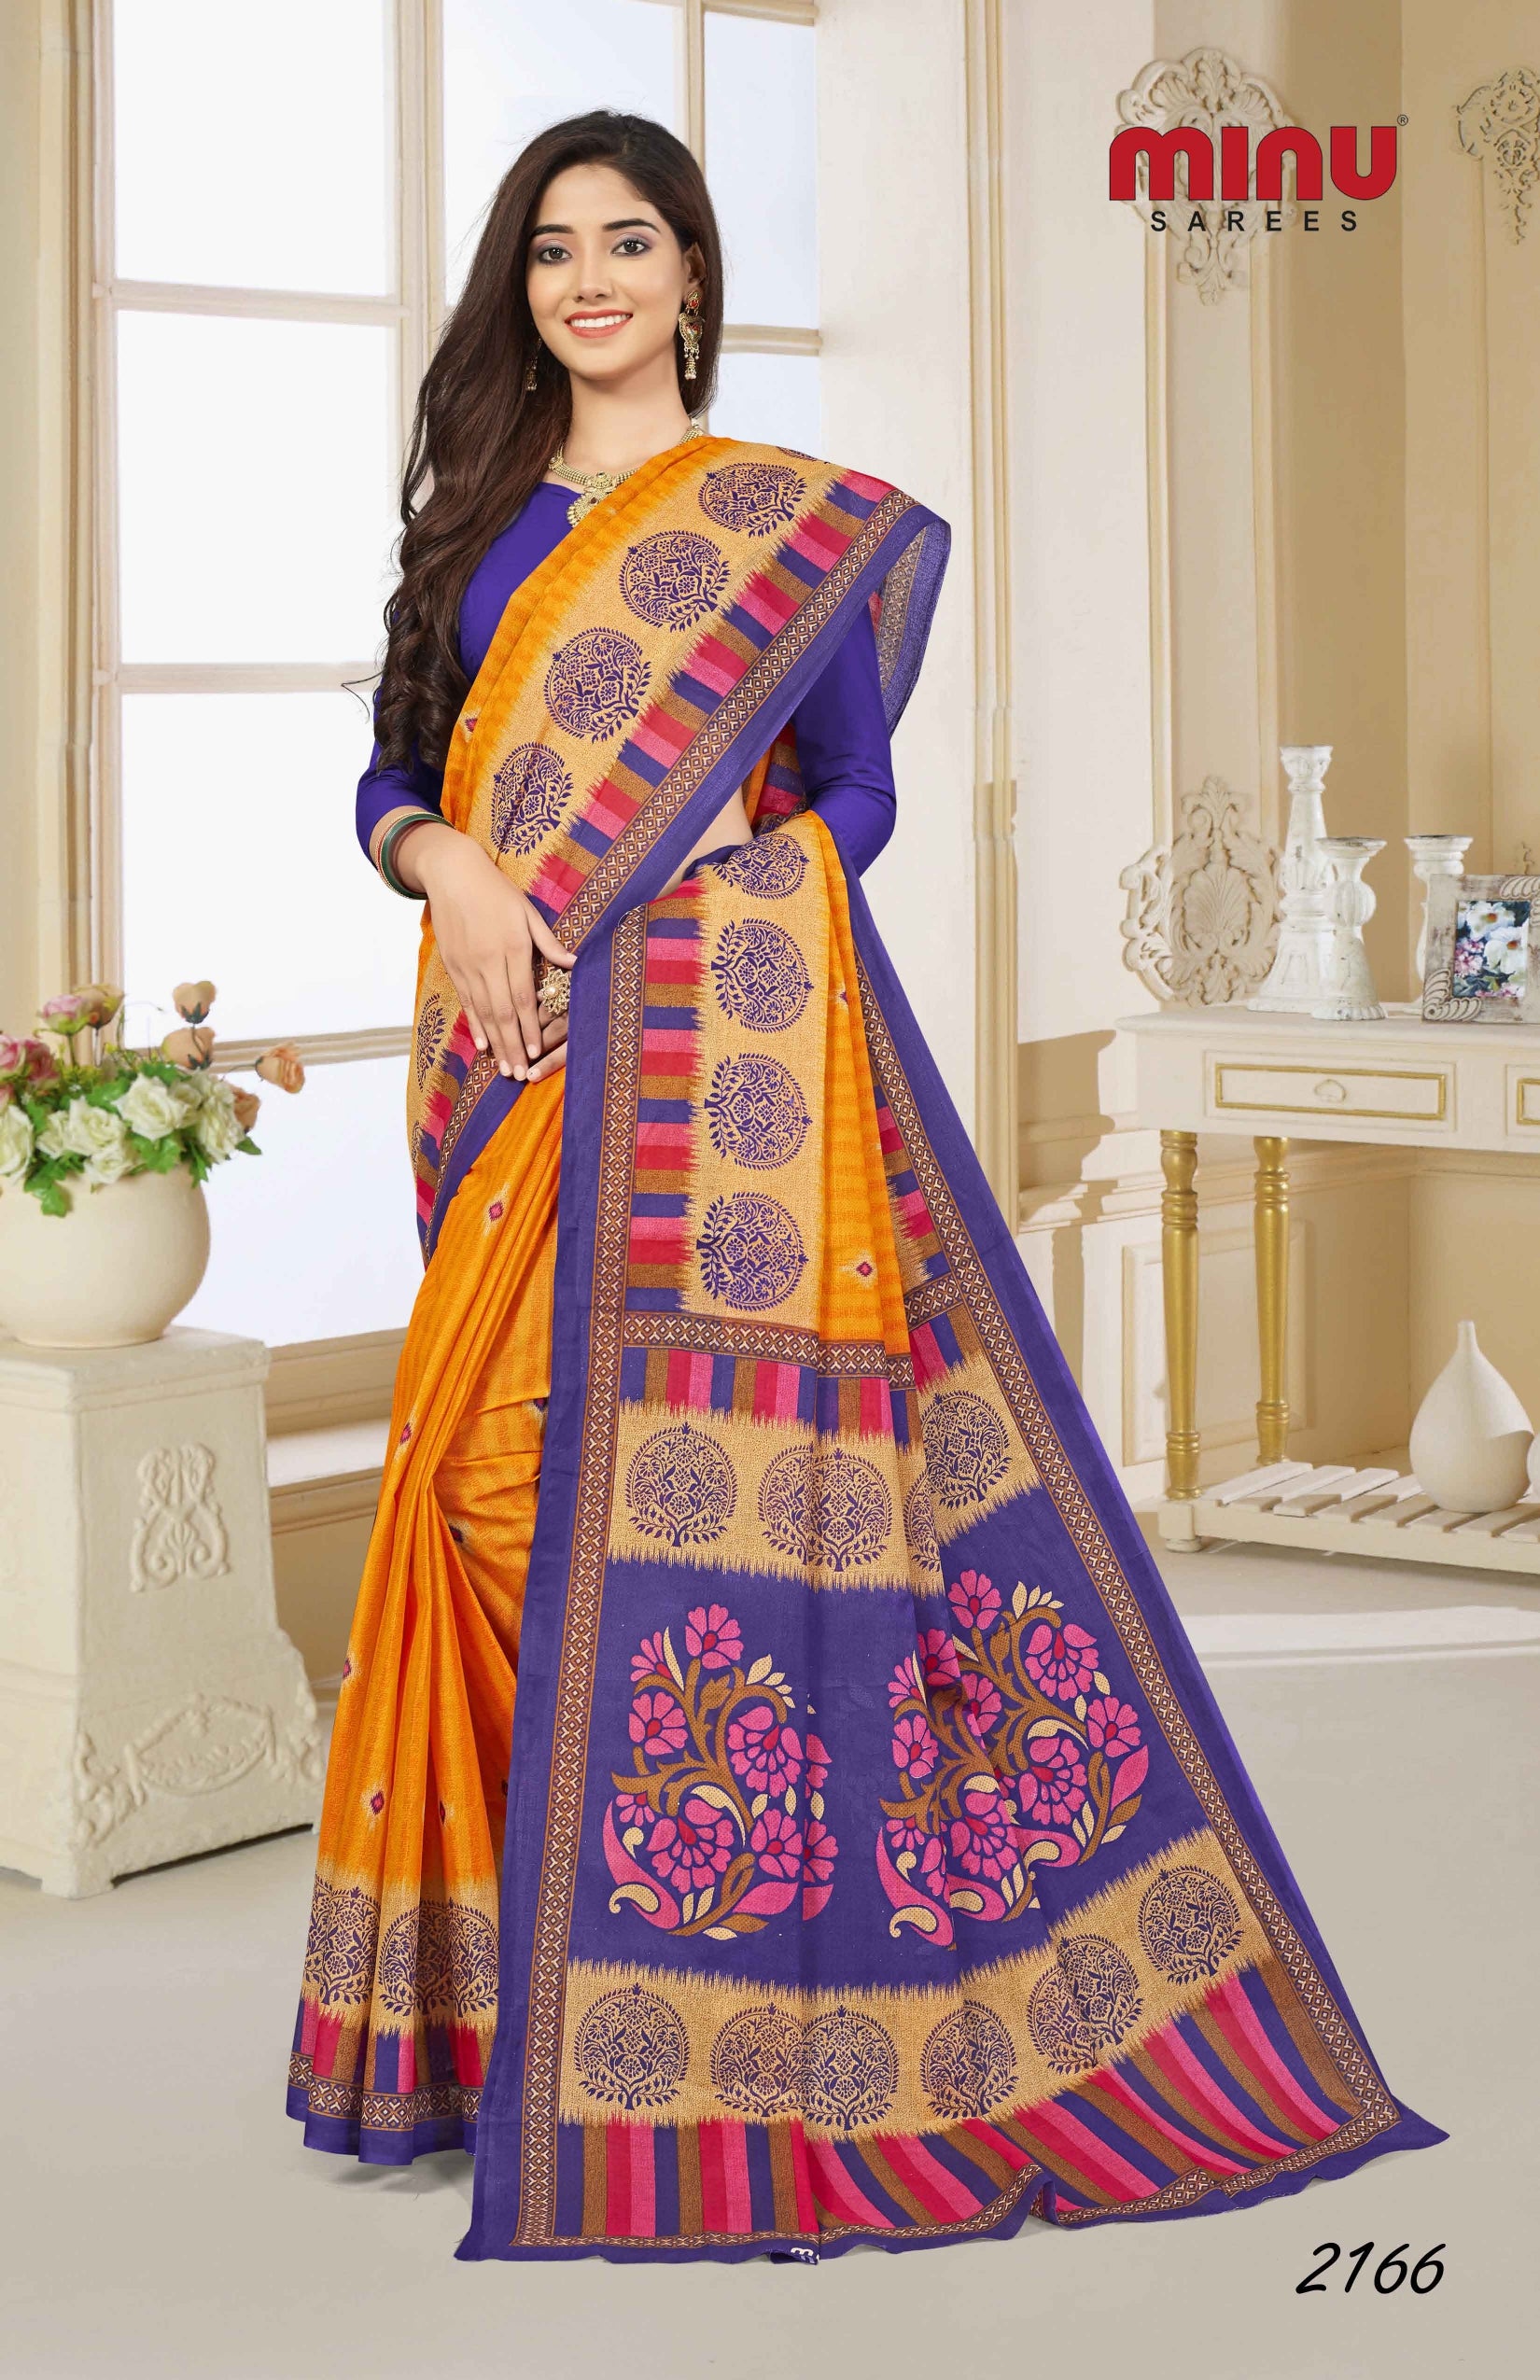 Woman wearing the best fashionable printed saree online